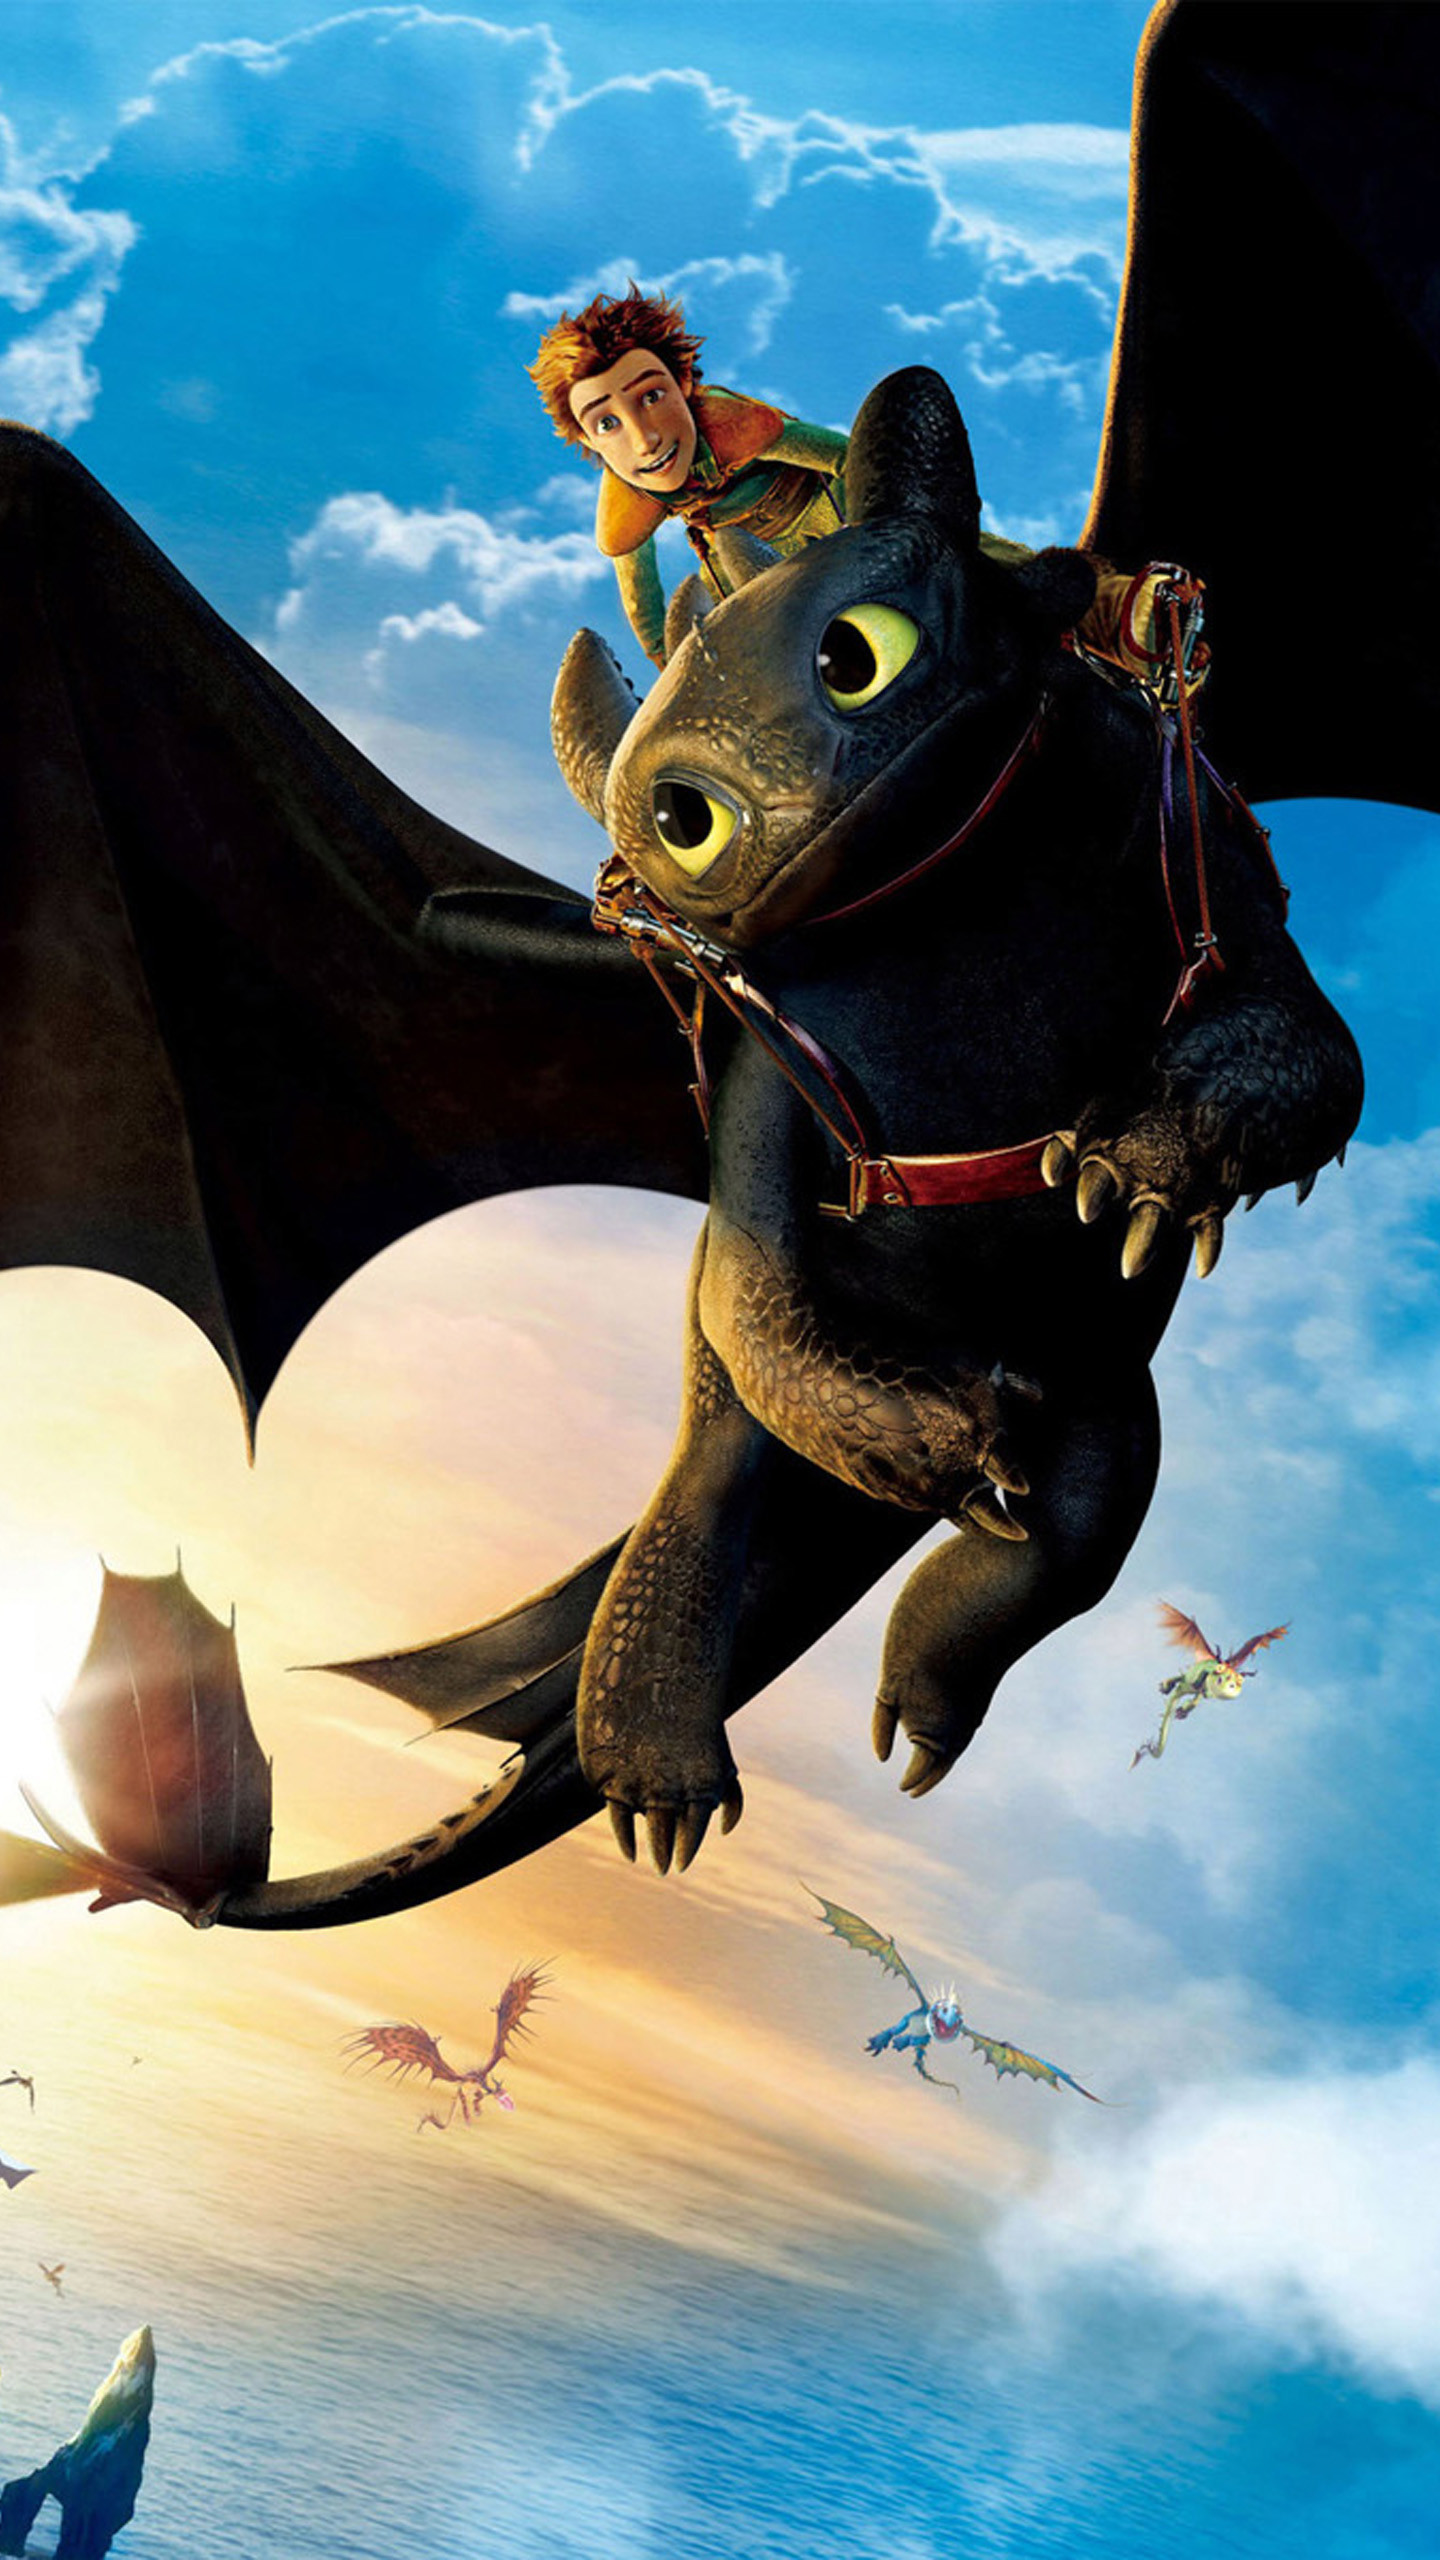 How To Train Your Dragon 2 Galaxy S6 Wallpaper 1440x2560